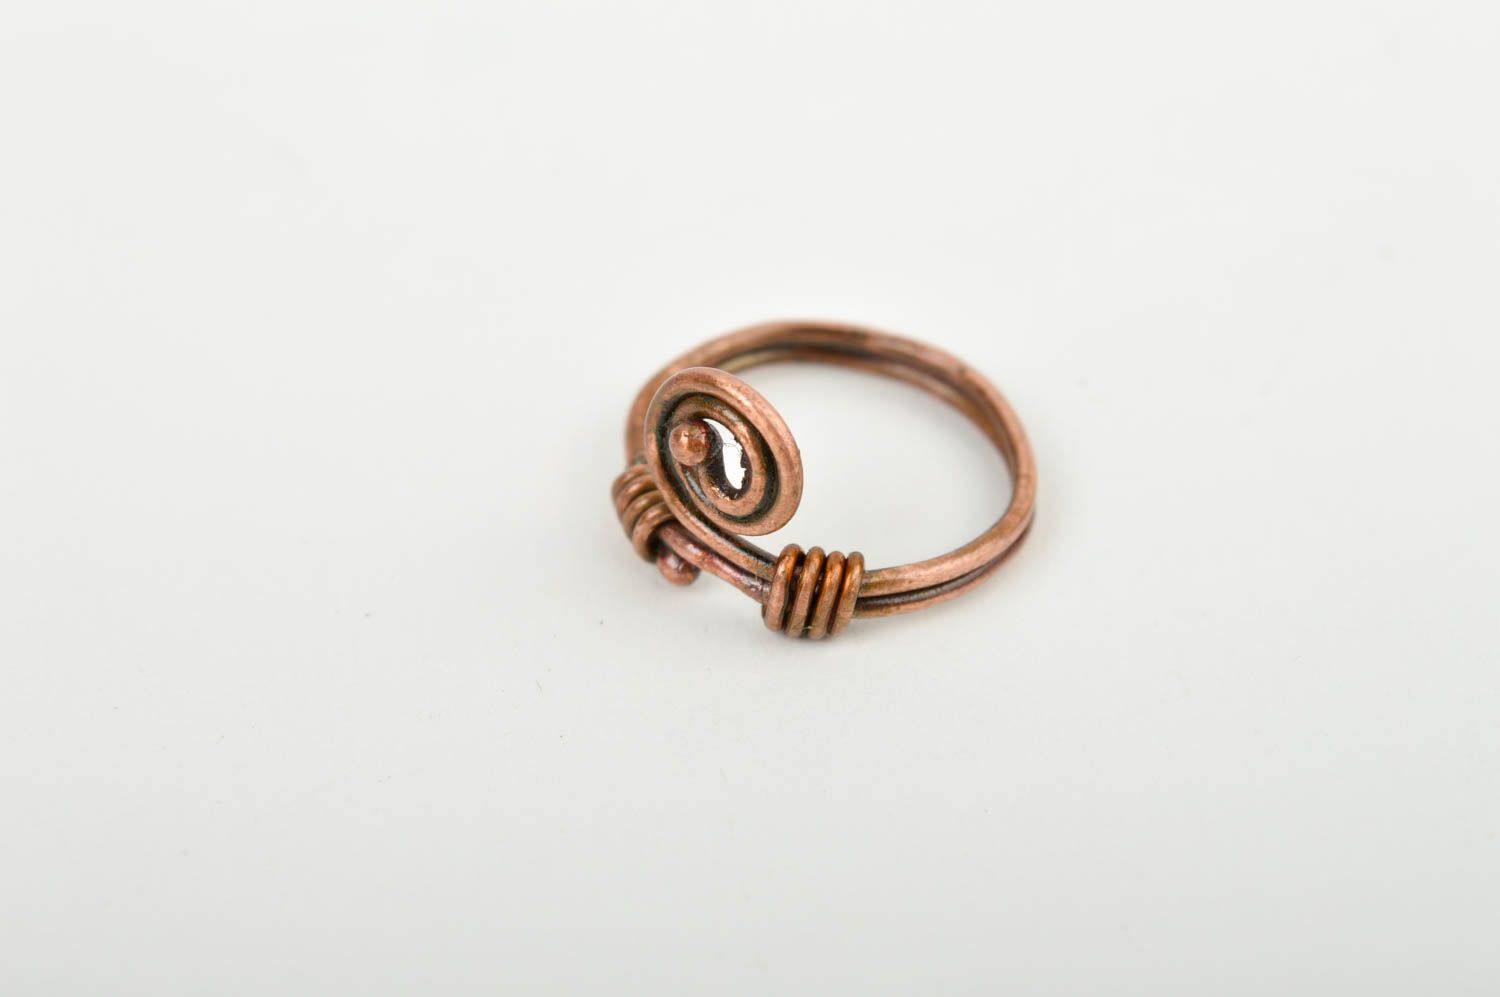 Unusual handmade metal ring forged ring design metal craft fashion trends photo 3